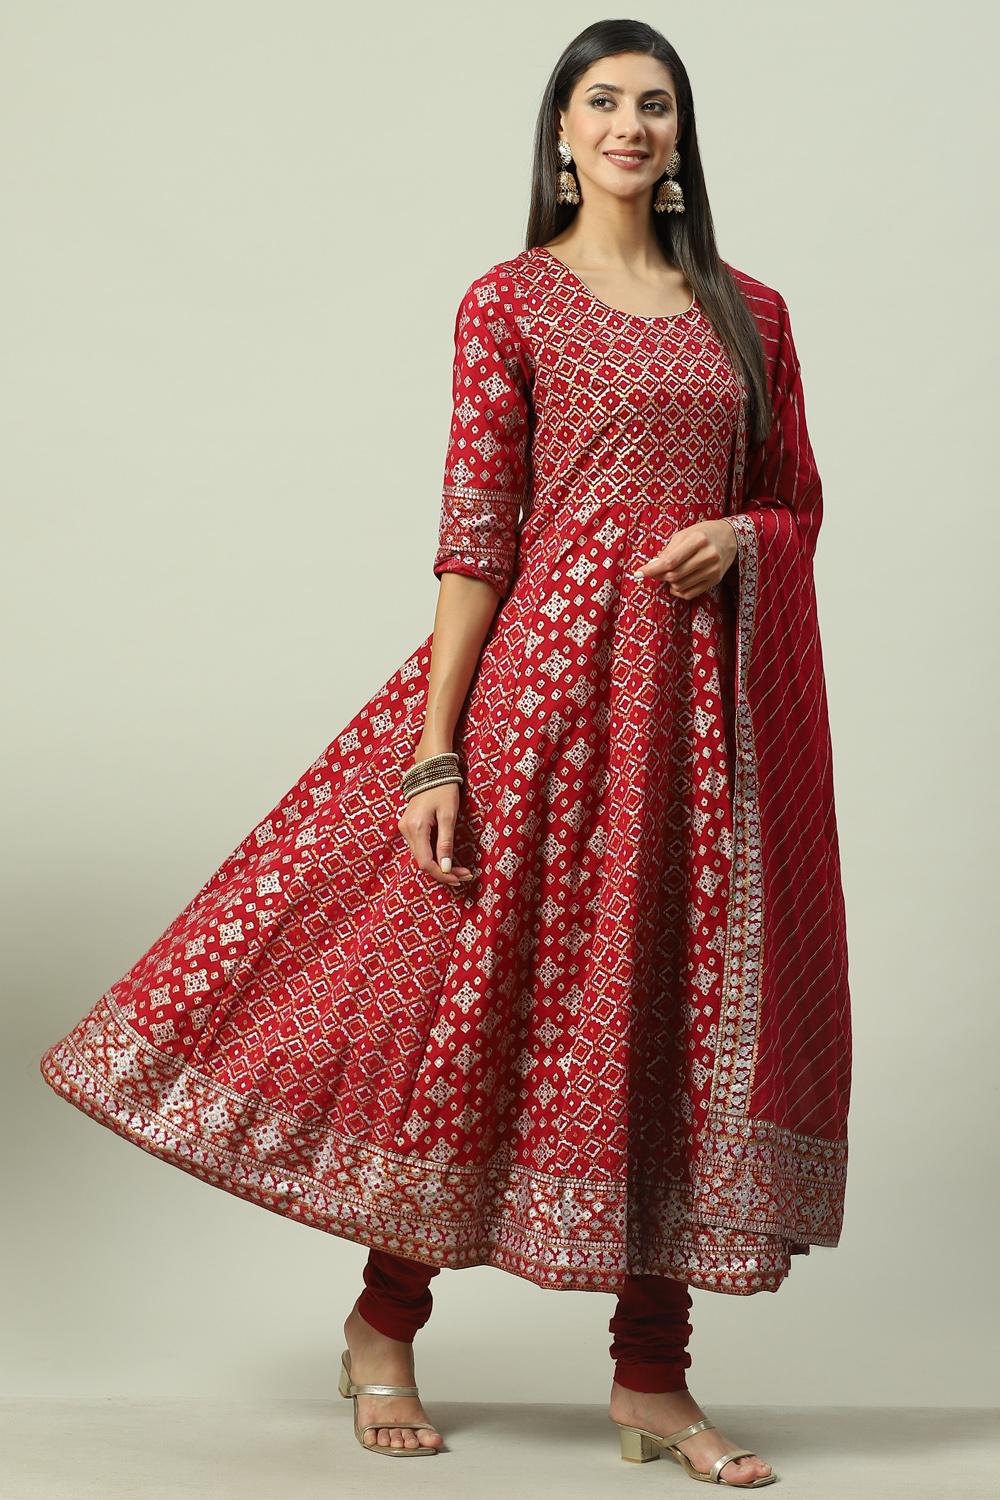 Buy online Cherry Red Cotton Anarkali Suit Set for women at best ...